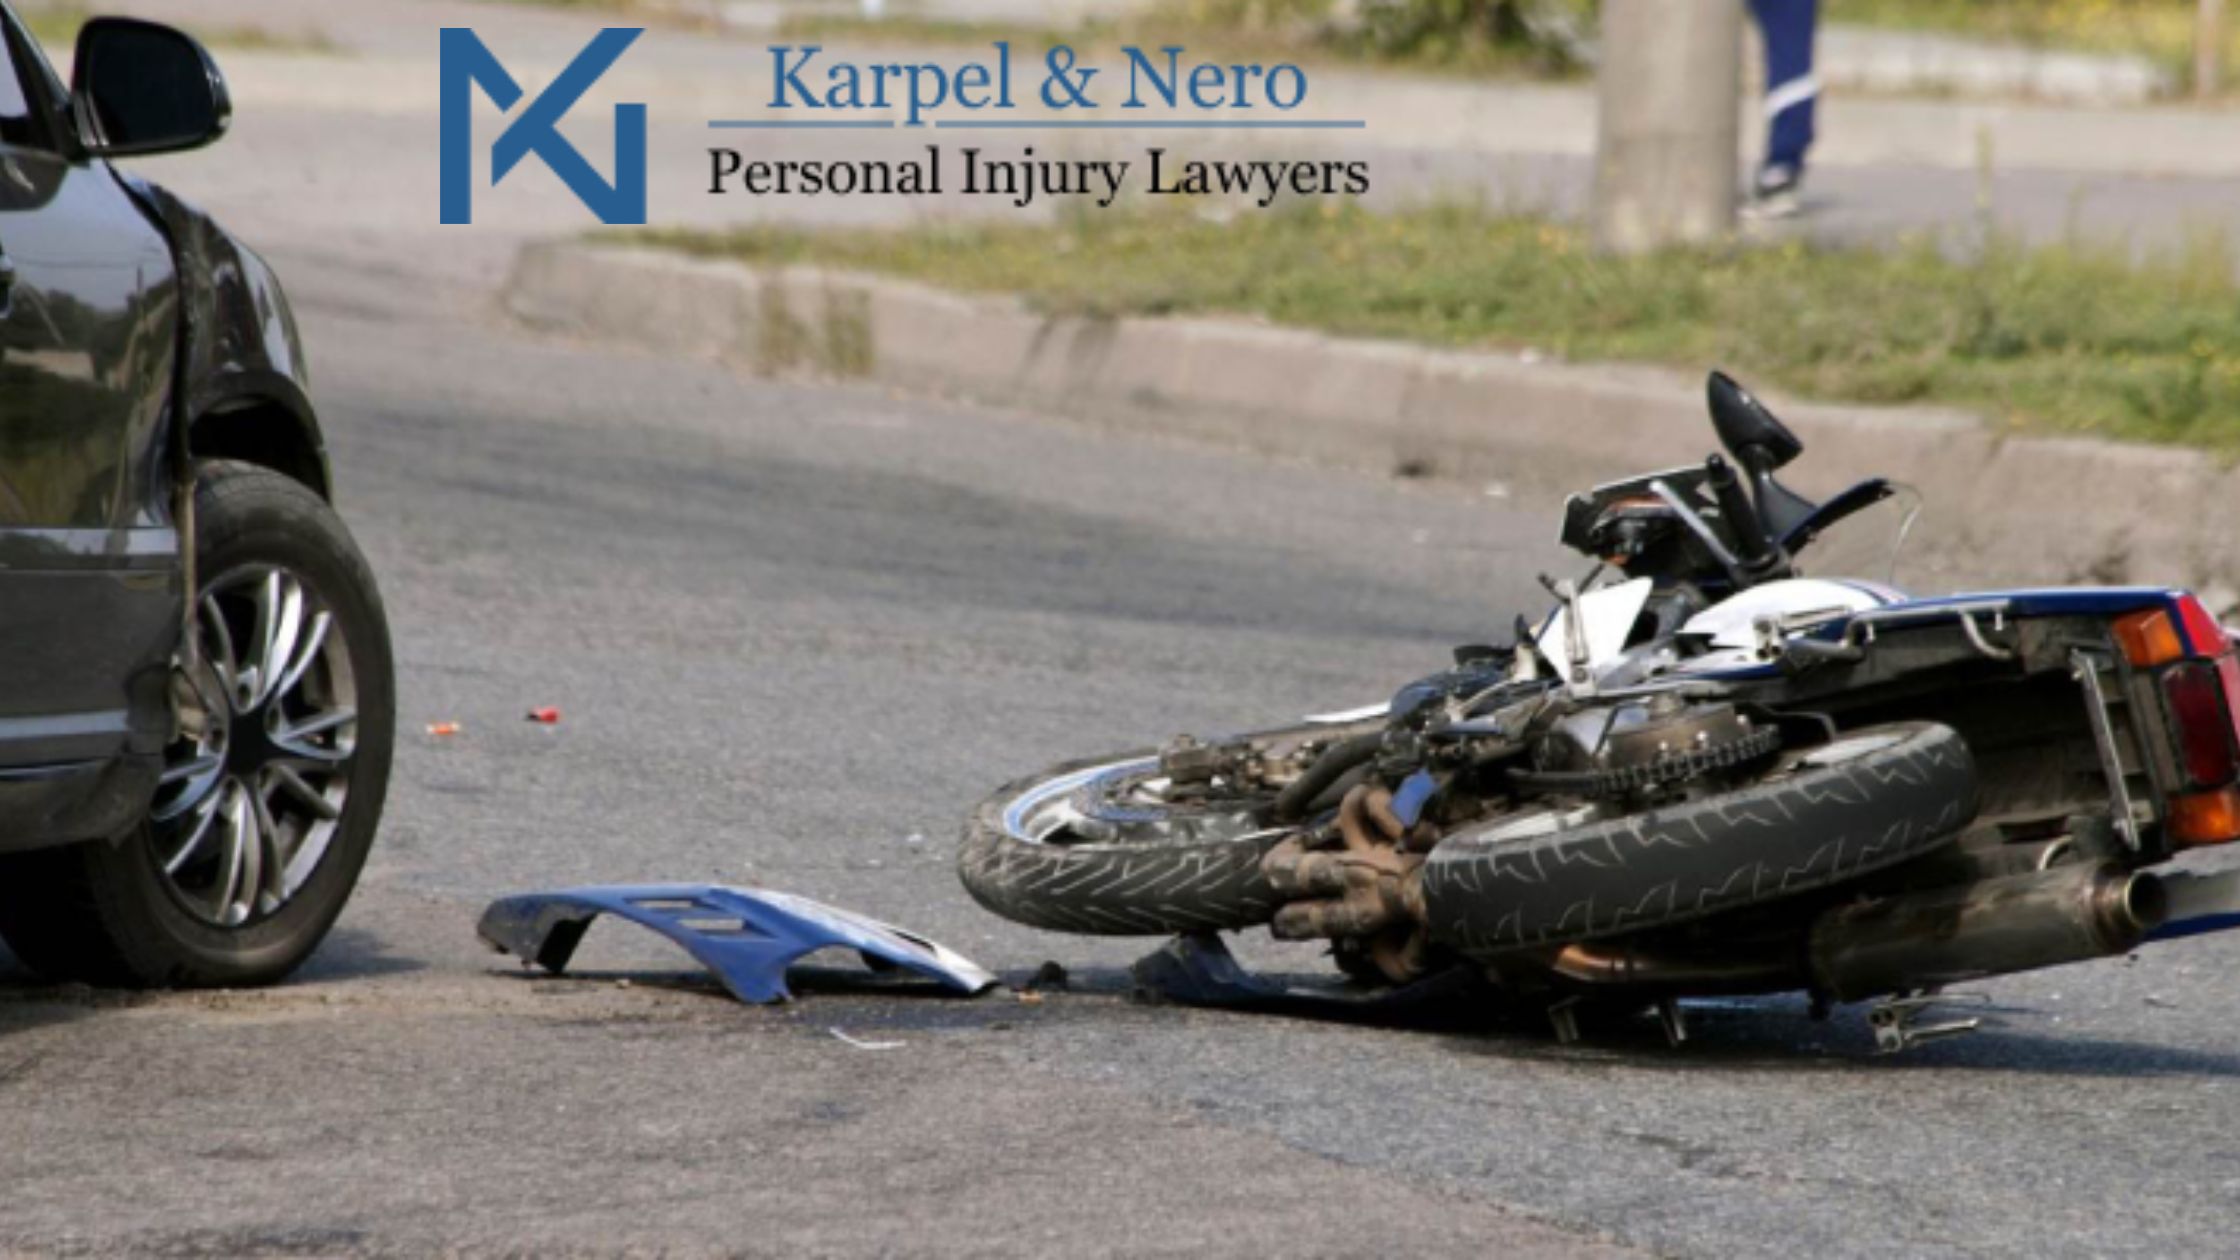 Accident Lawyer in Los Angeles